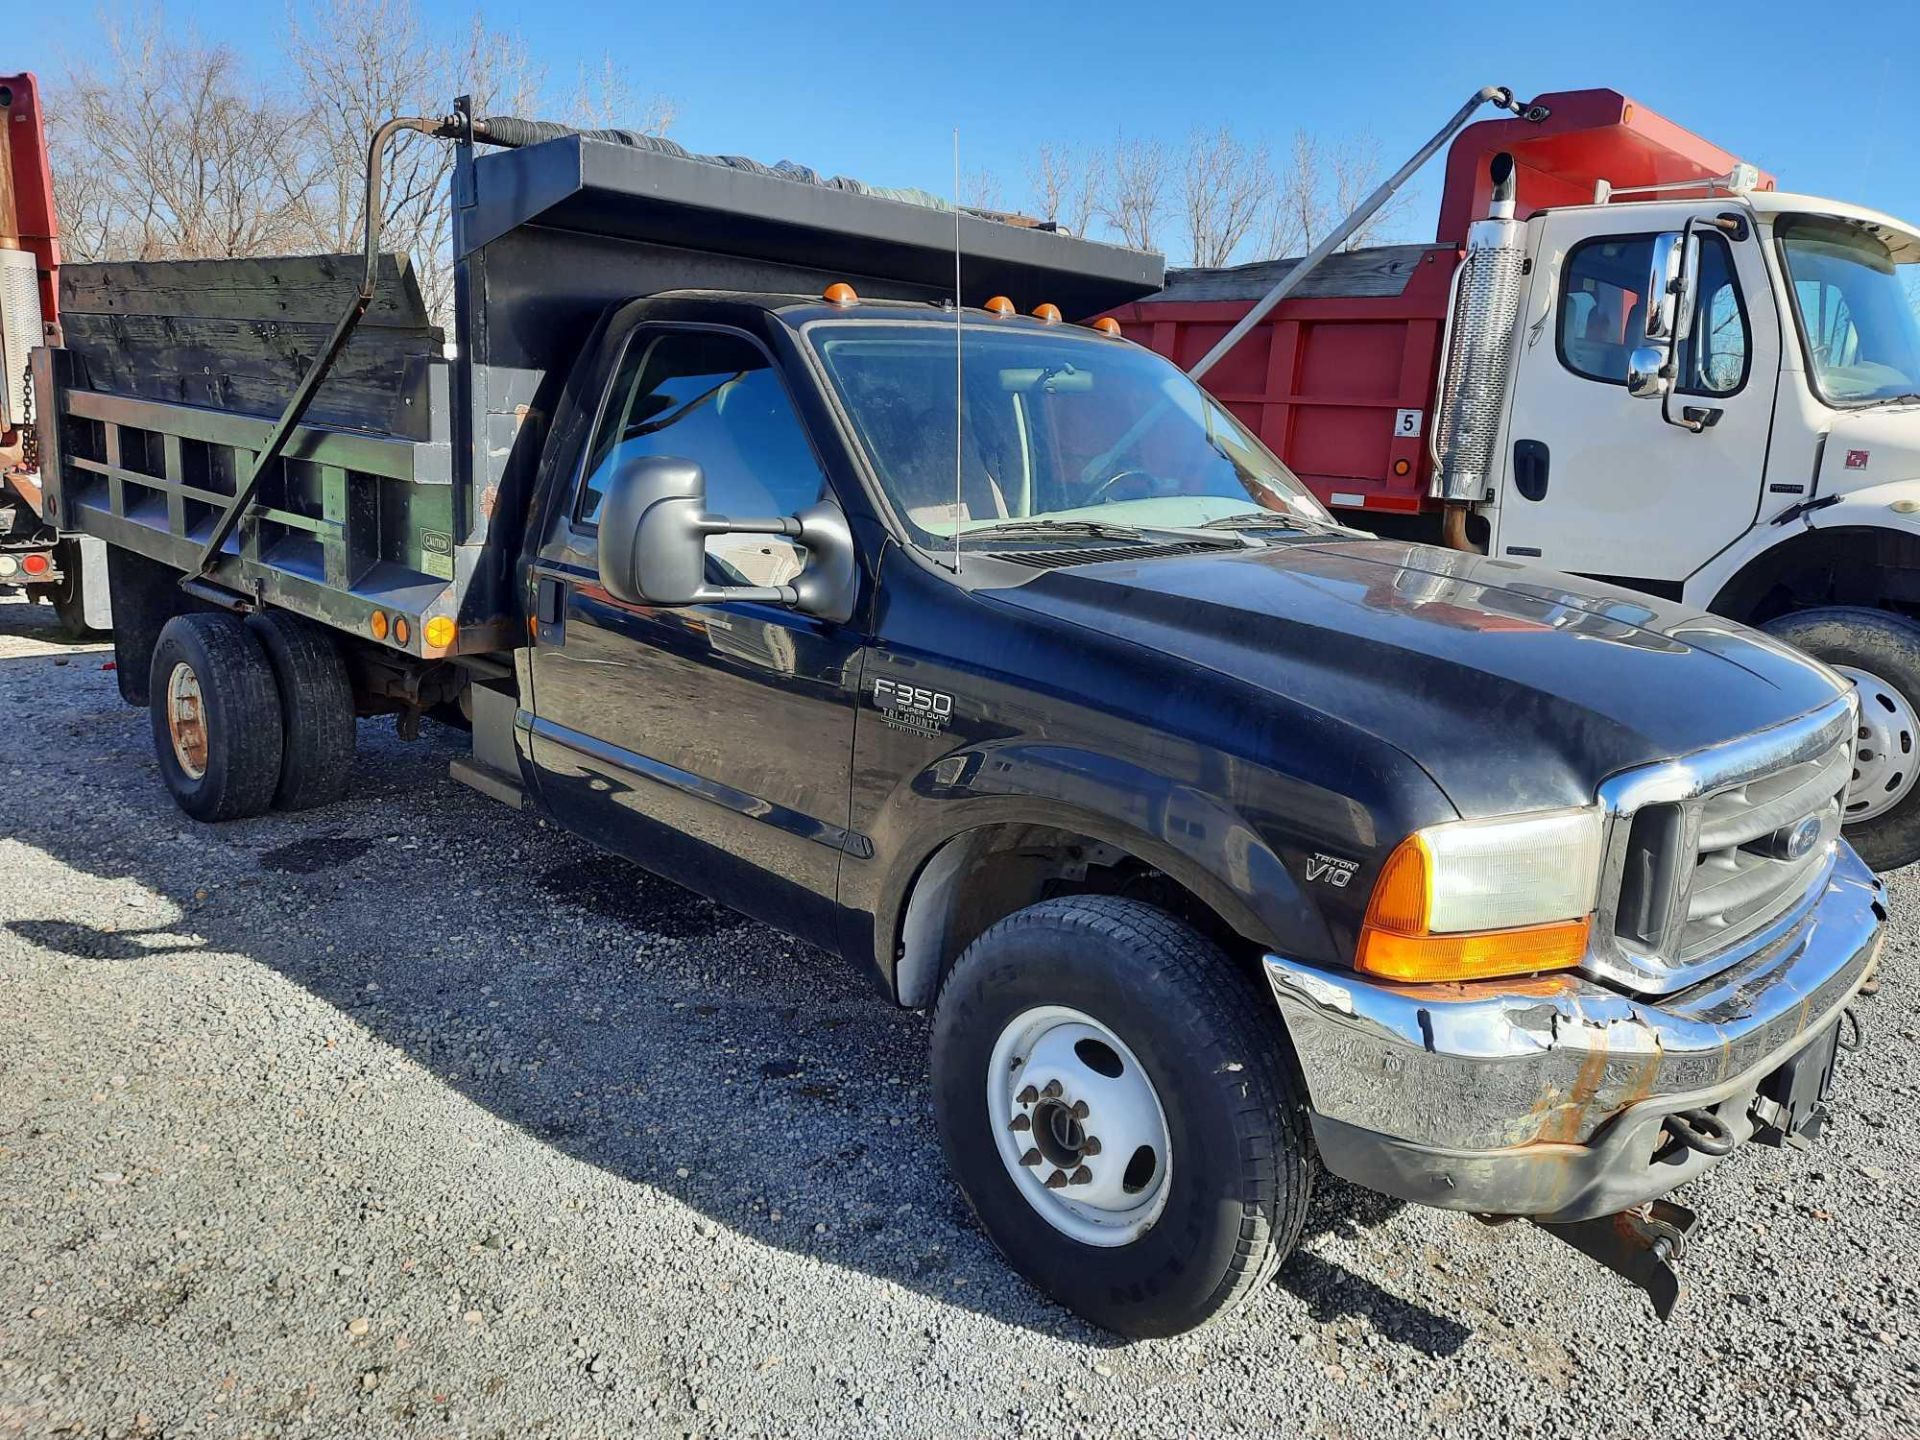 2001 FORD F350 XL SUPER DUTY S/A 11' DUMP BODY TRUCK W/SNOWPLOW (INOPERABLE) - Image 4 of 25